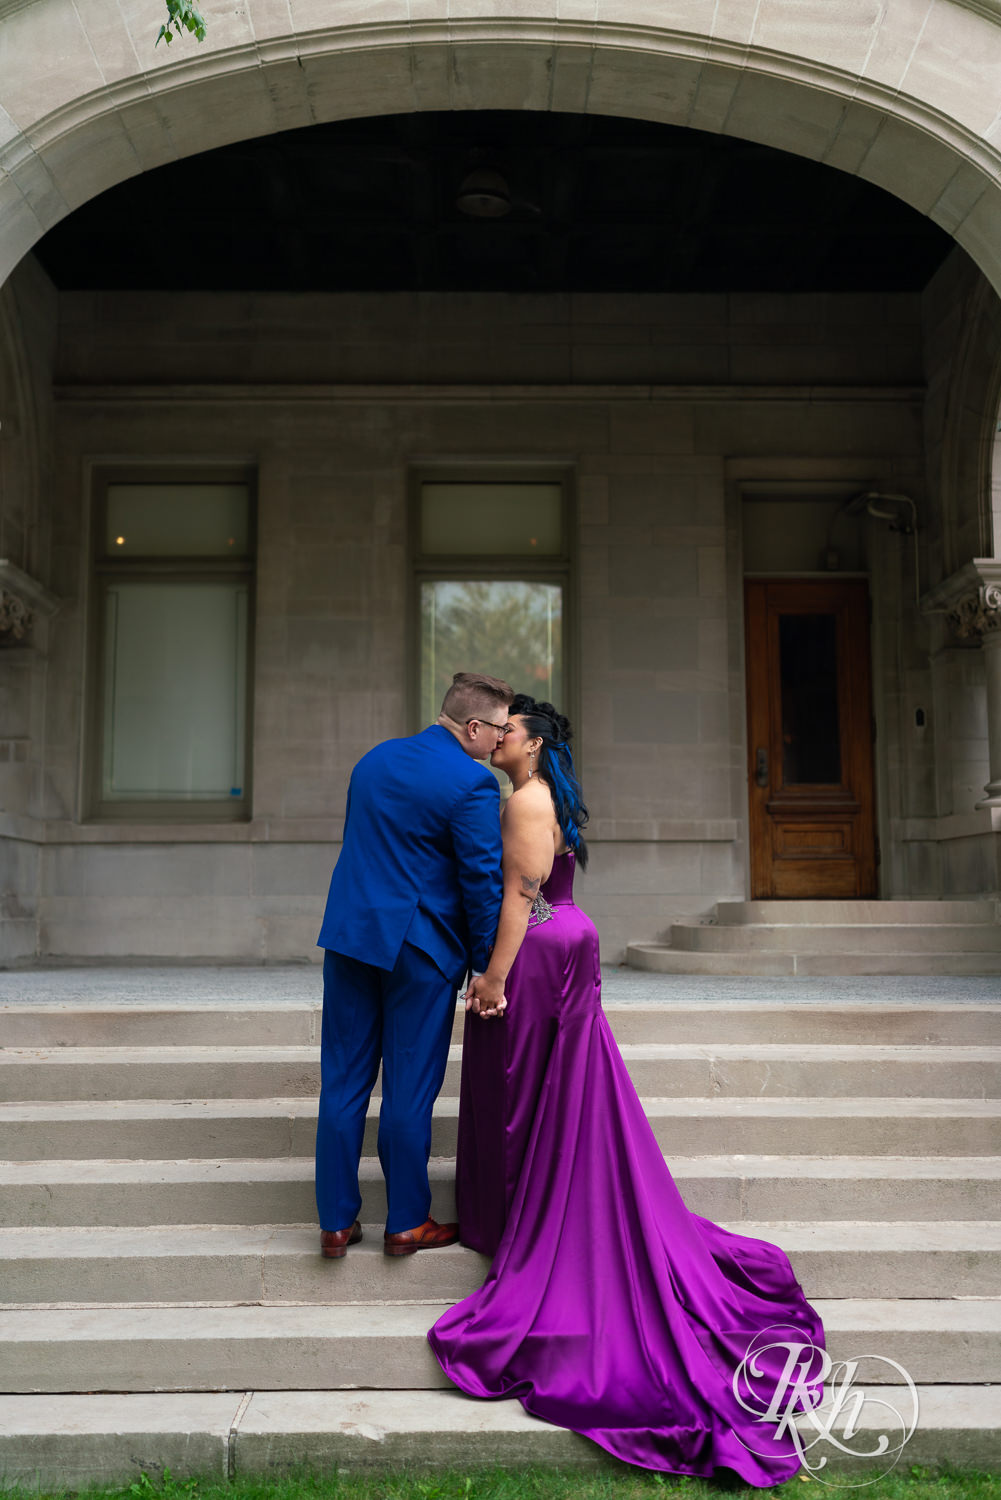 Filipino bride with mohawk dressed in purple wedding dress and groom kiss at American Swedish Institute in Minnesota.